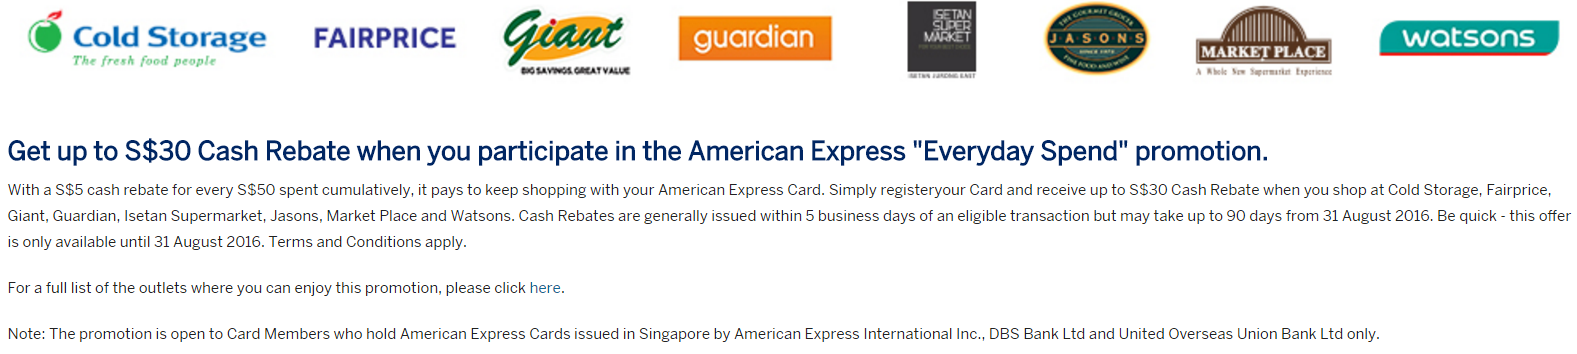 american-express-everyday-spend-10-rebate-promotion